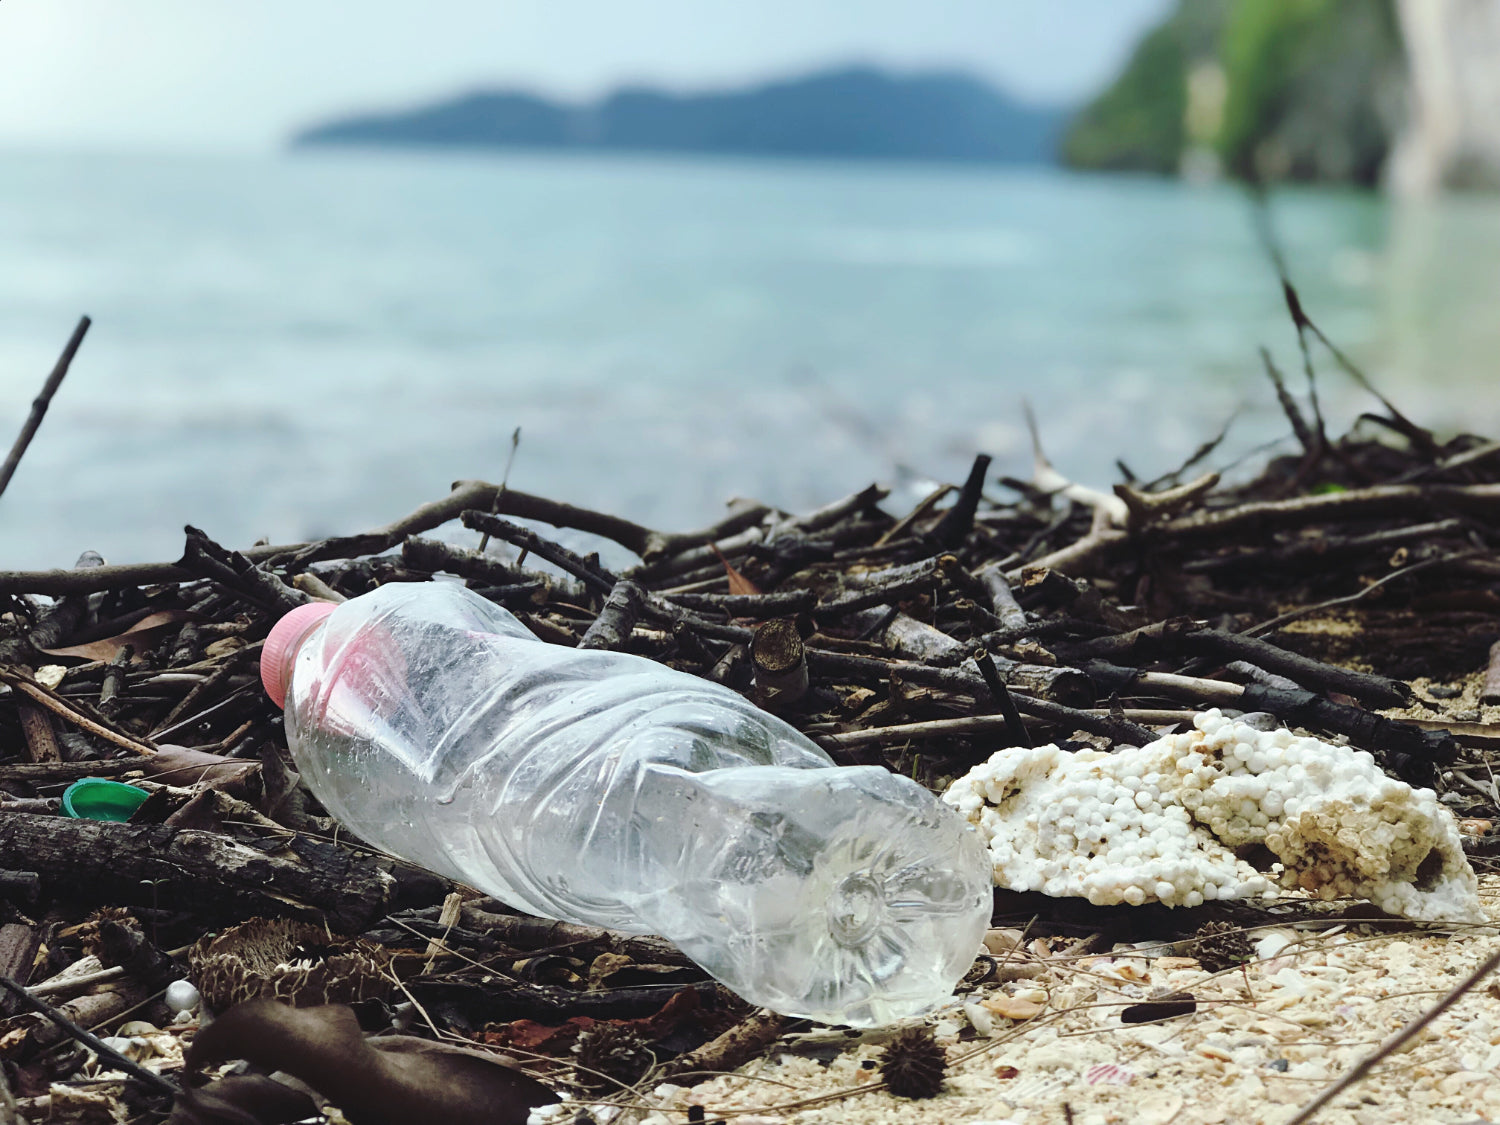 A discarded single use plastic bottle lies on the beach